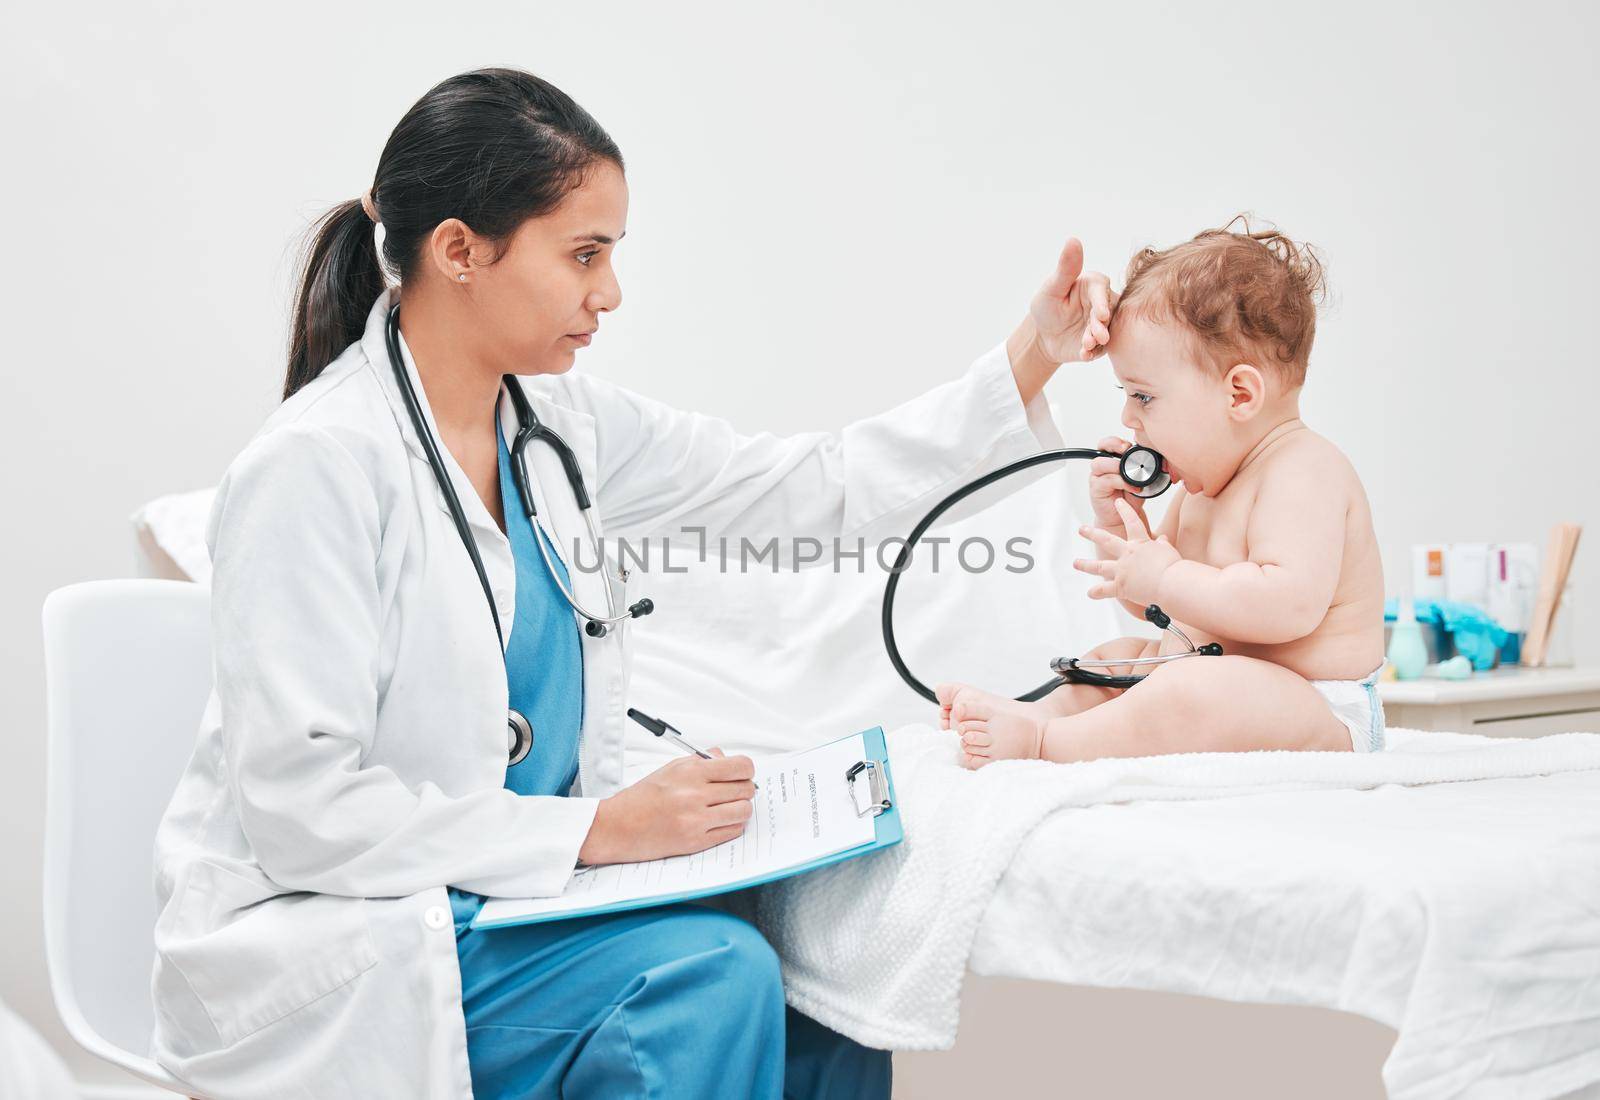 Shot of a paediatrician completing paperwork during a checkup.